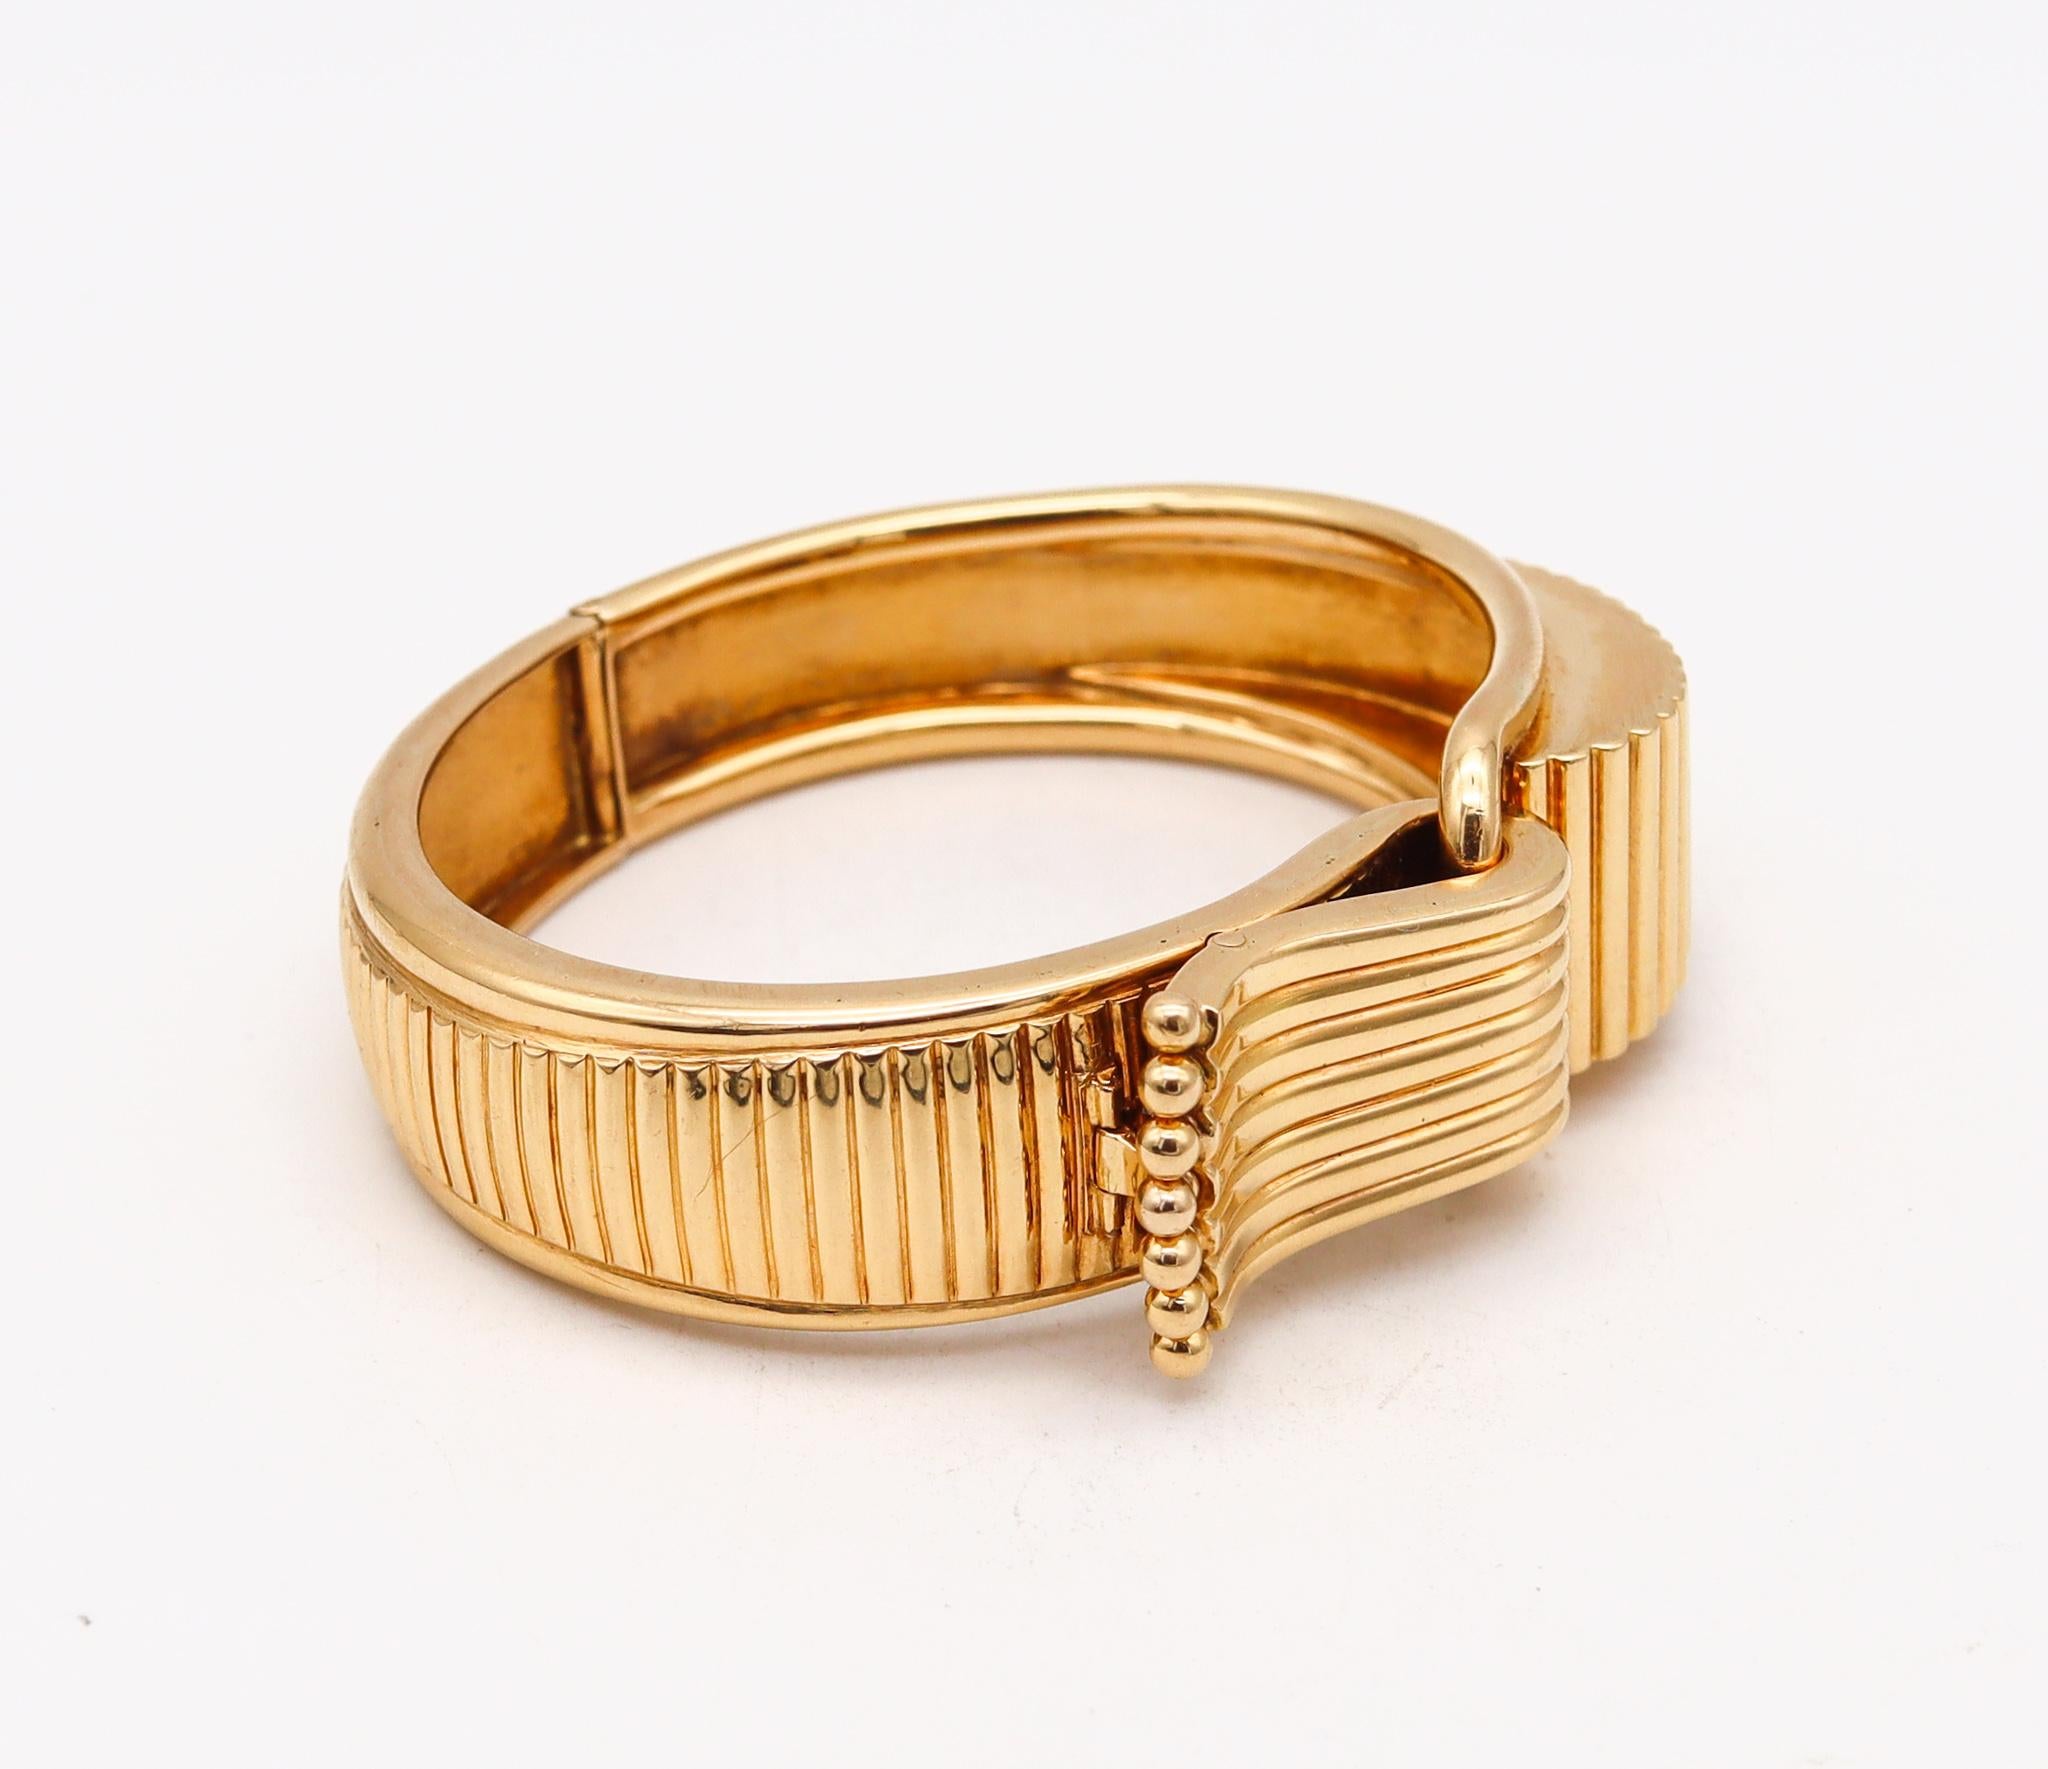 Women's Art Deco 1930 Machine Age Geometric Bangle Bracelet in Solid 18Kt Yellow Gold For Sale